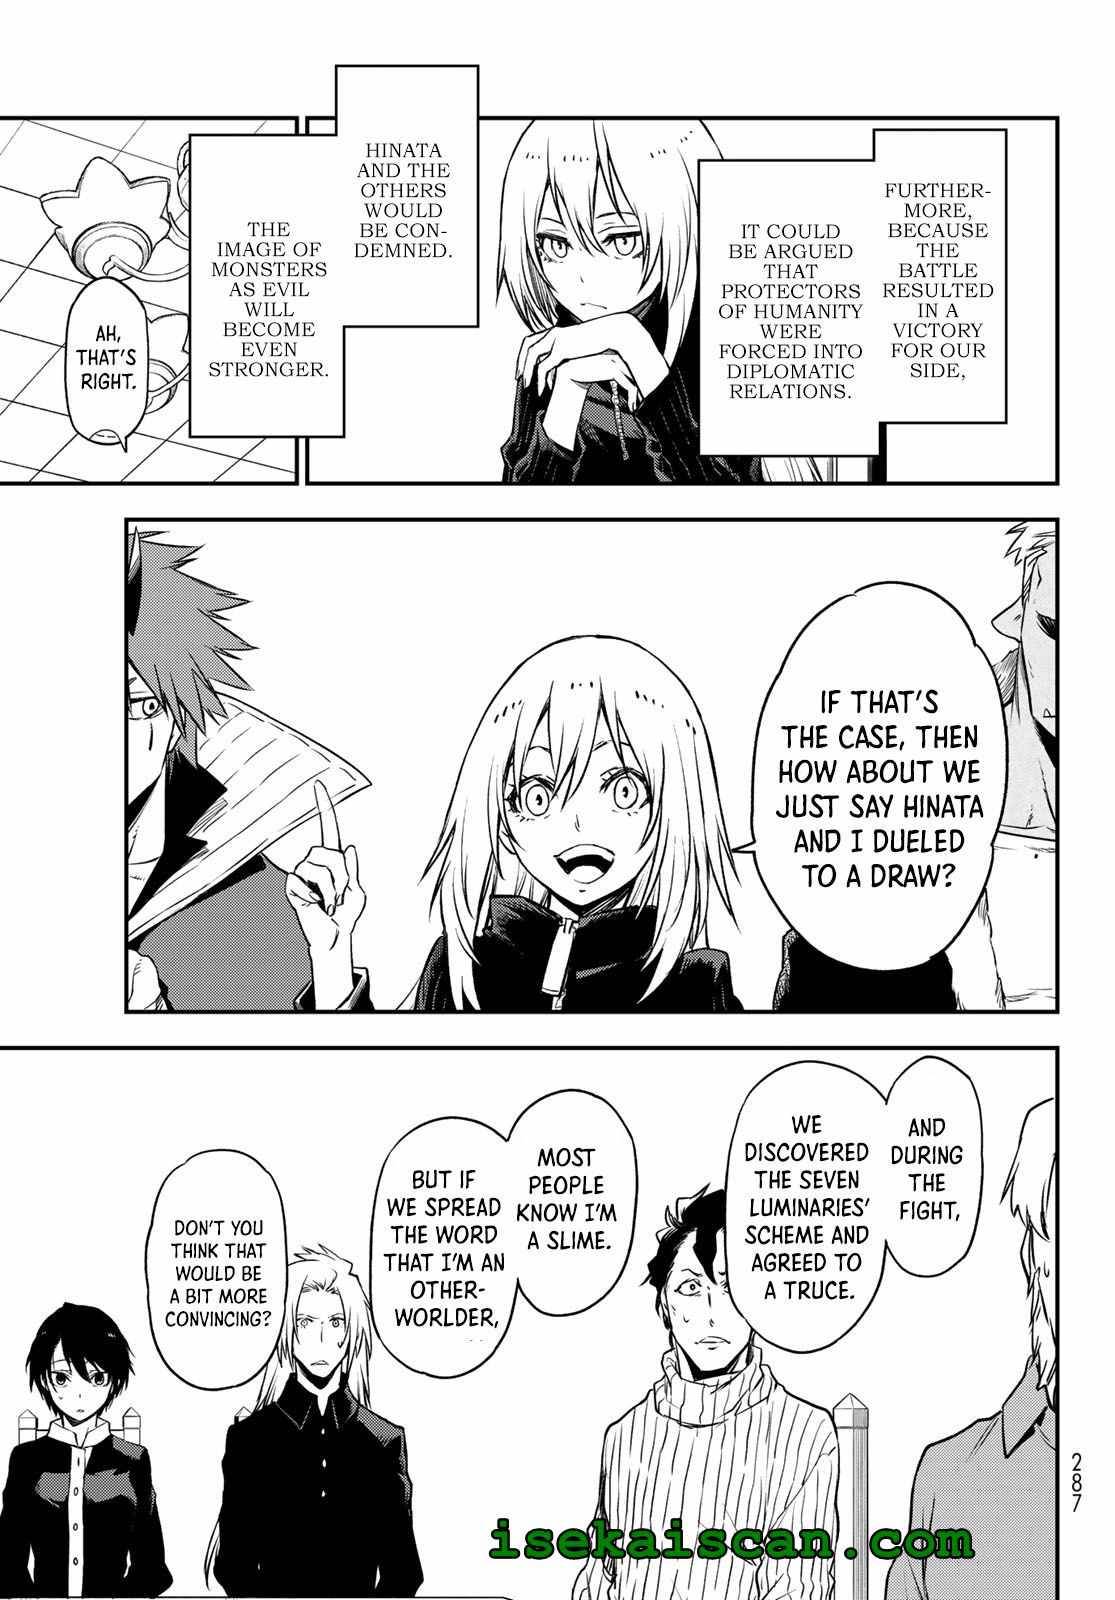 That Time I Got Reincarnated as a Slime, Chapter 100